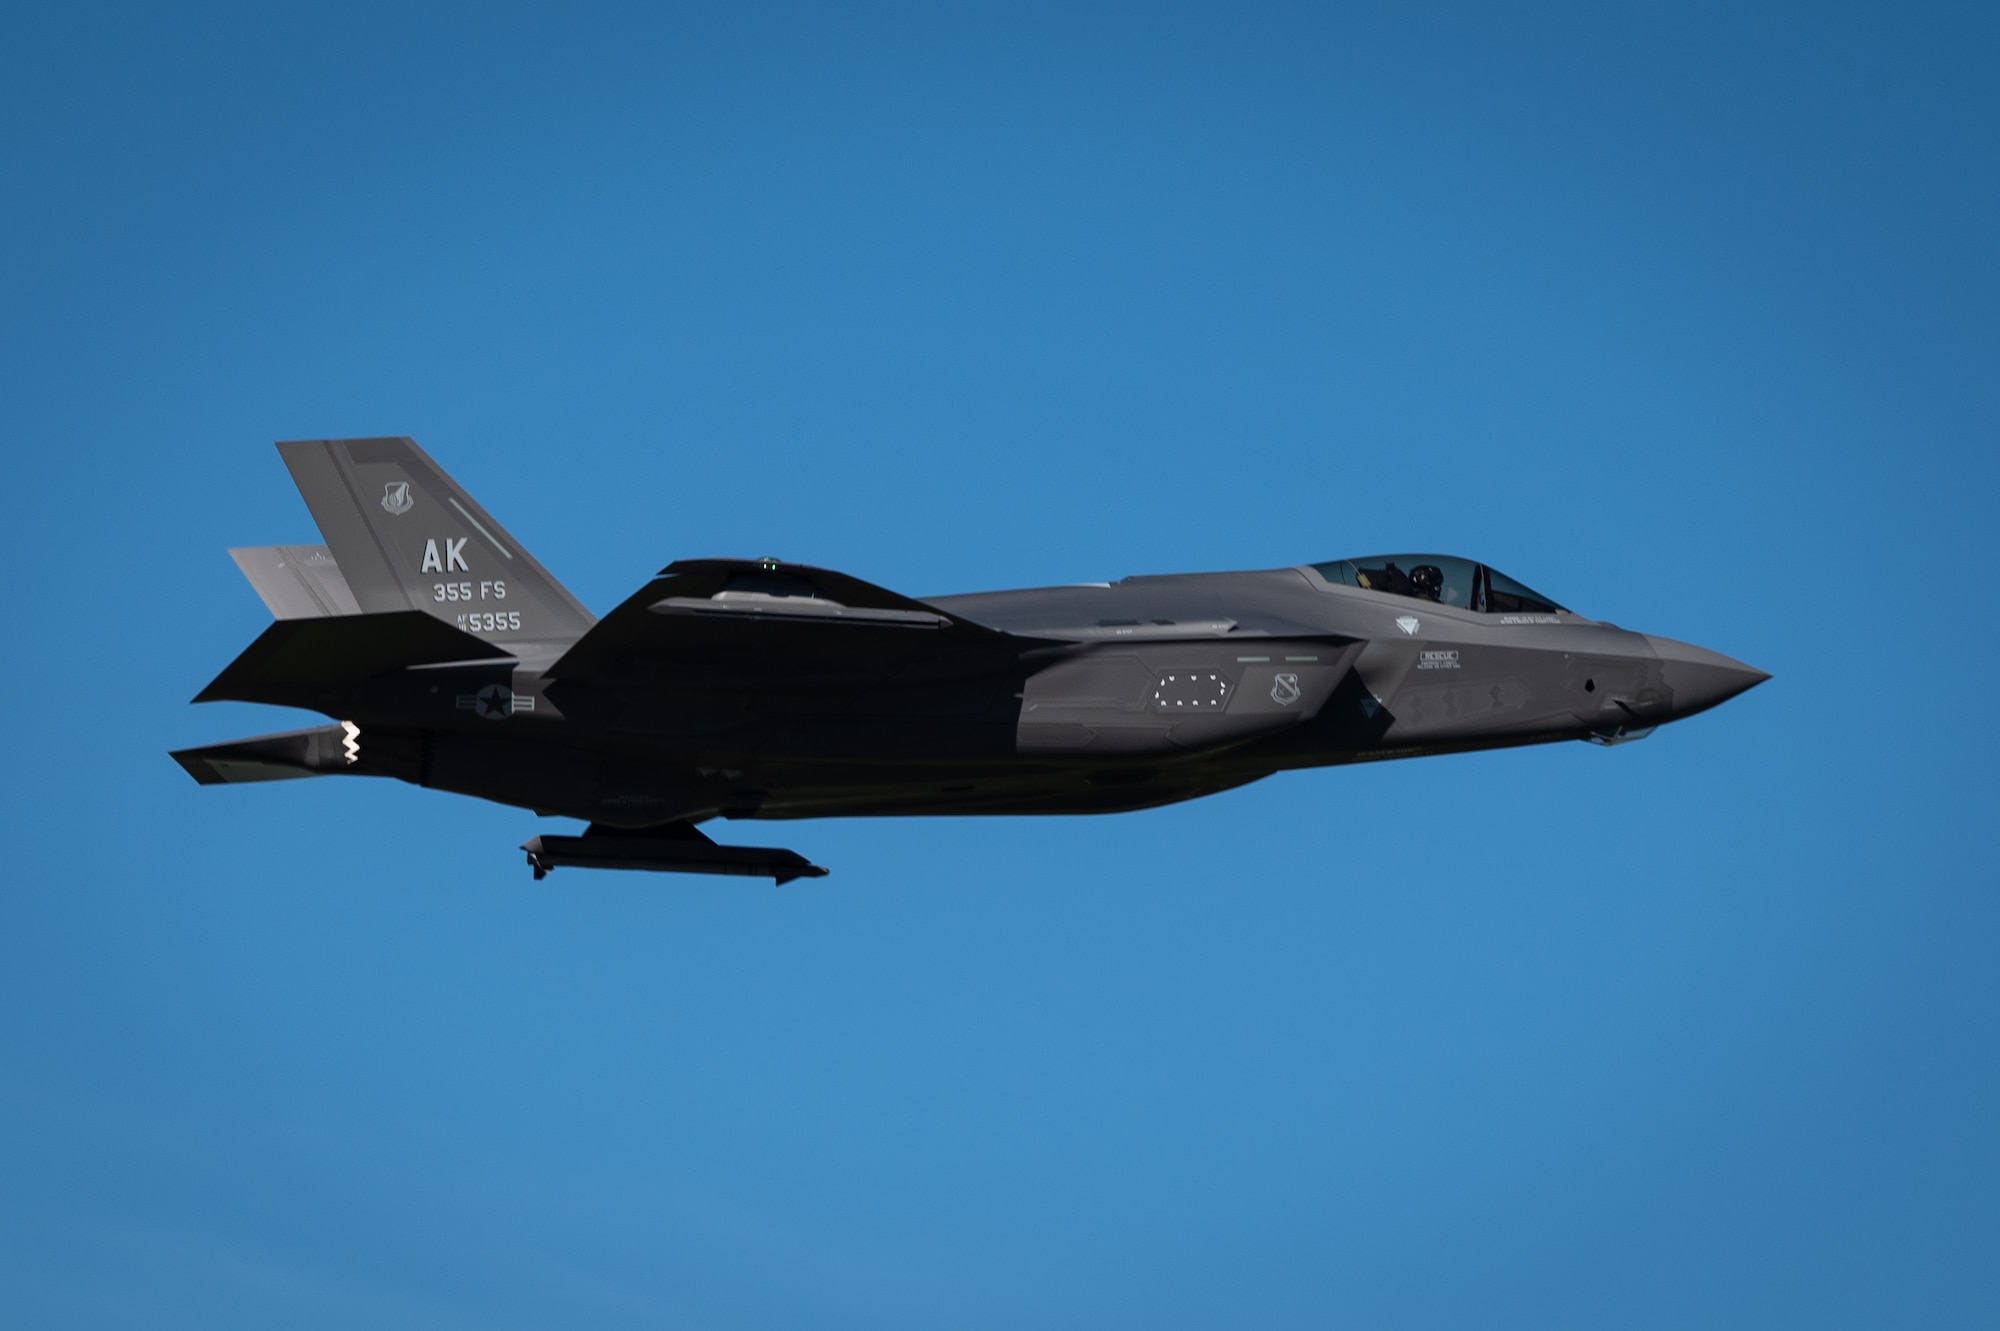 An F-35A Lightning II assigned to the 355th Fighter Squadron flies over Eielson Air Force Base, Alaska, July 1, 2021.